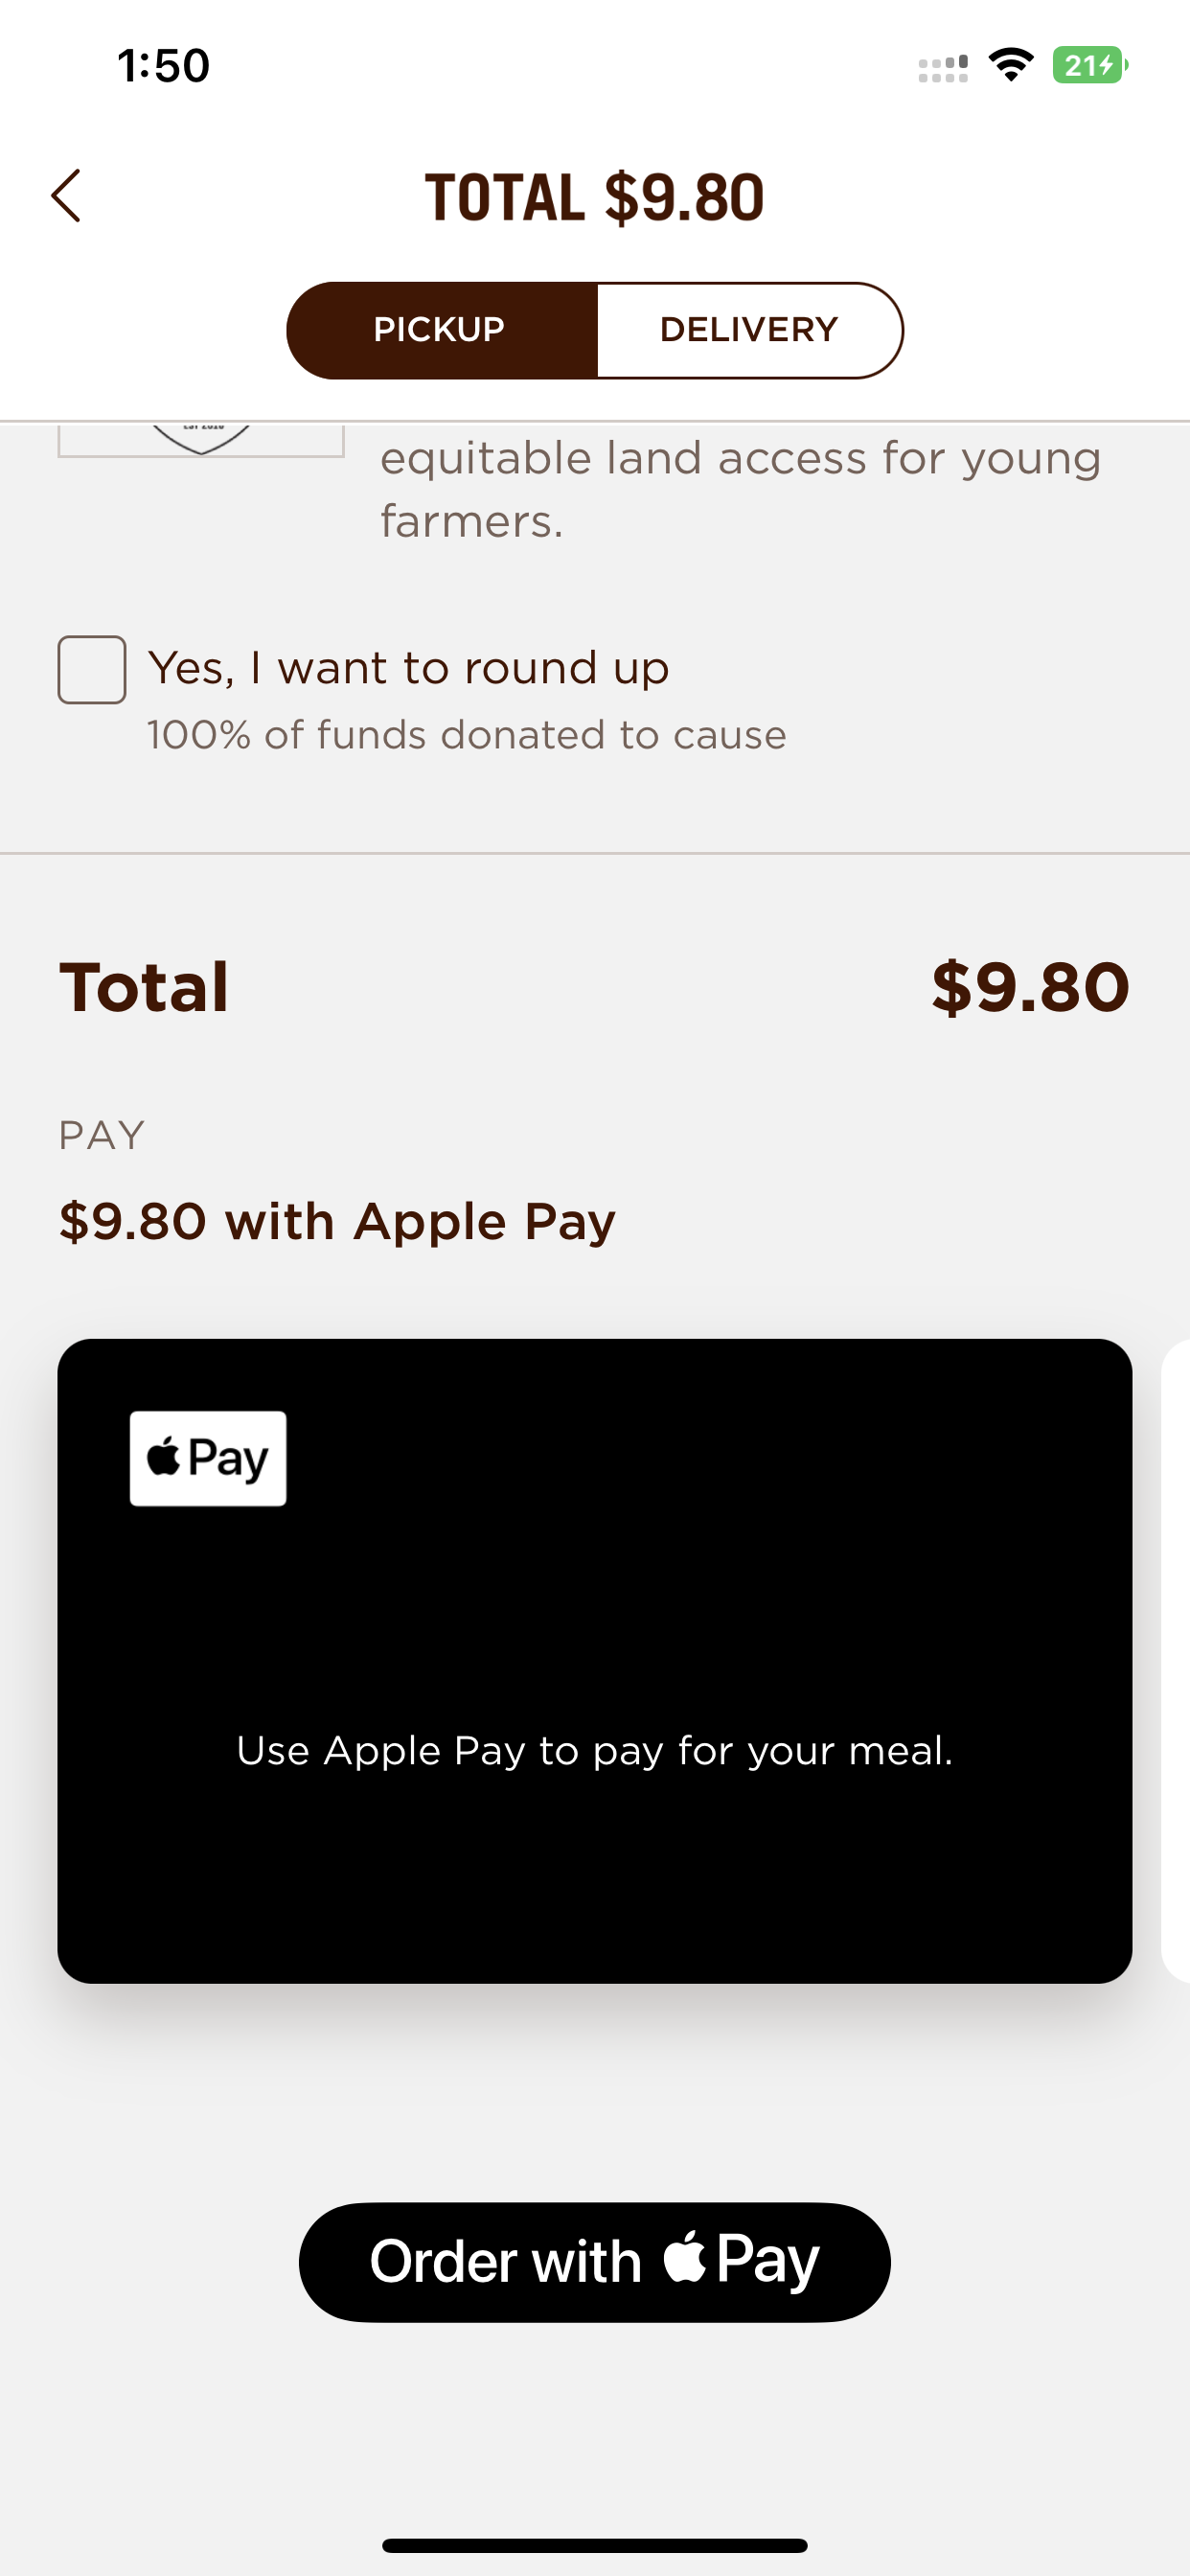 Chipotle accepts Apple Pay in its iOS app.